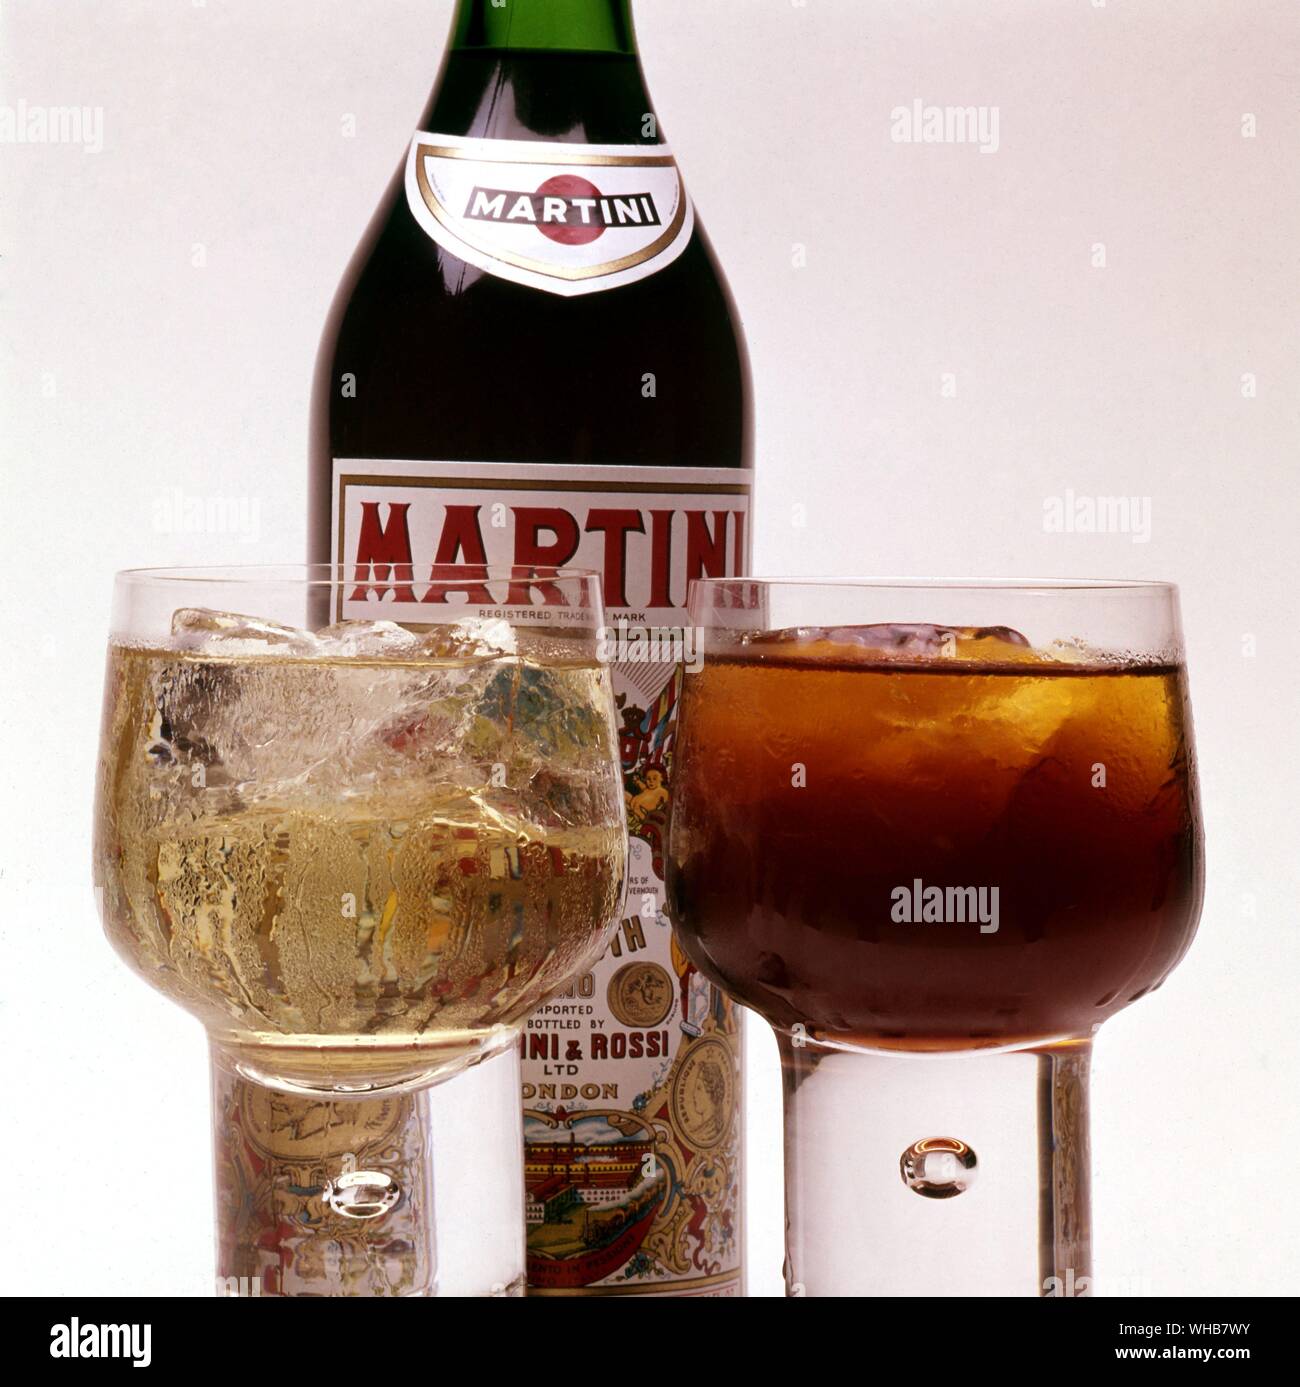 Red Martini bottle with full glasses in front. Stock Photo